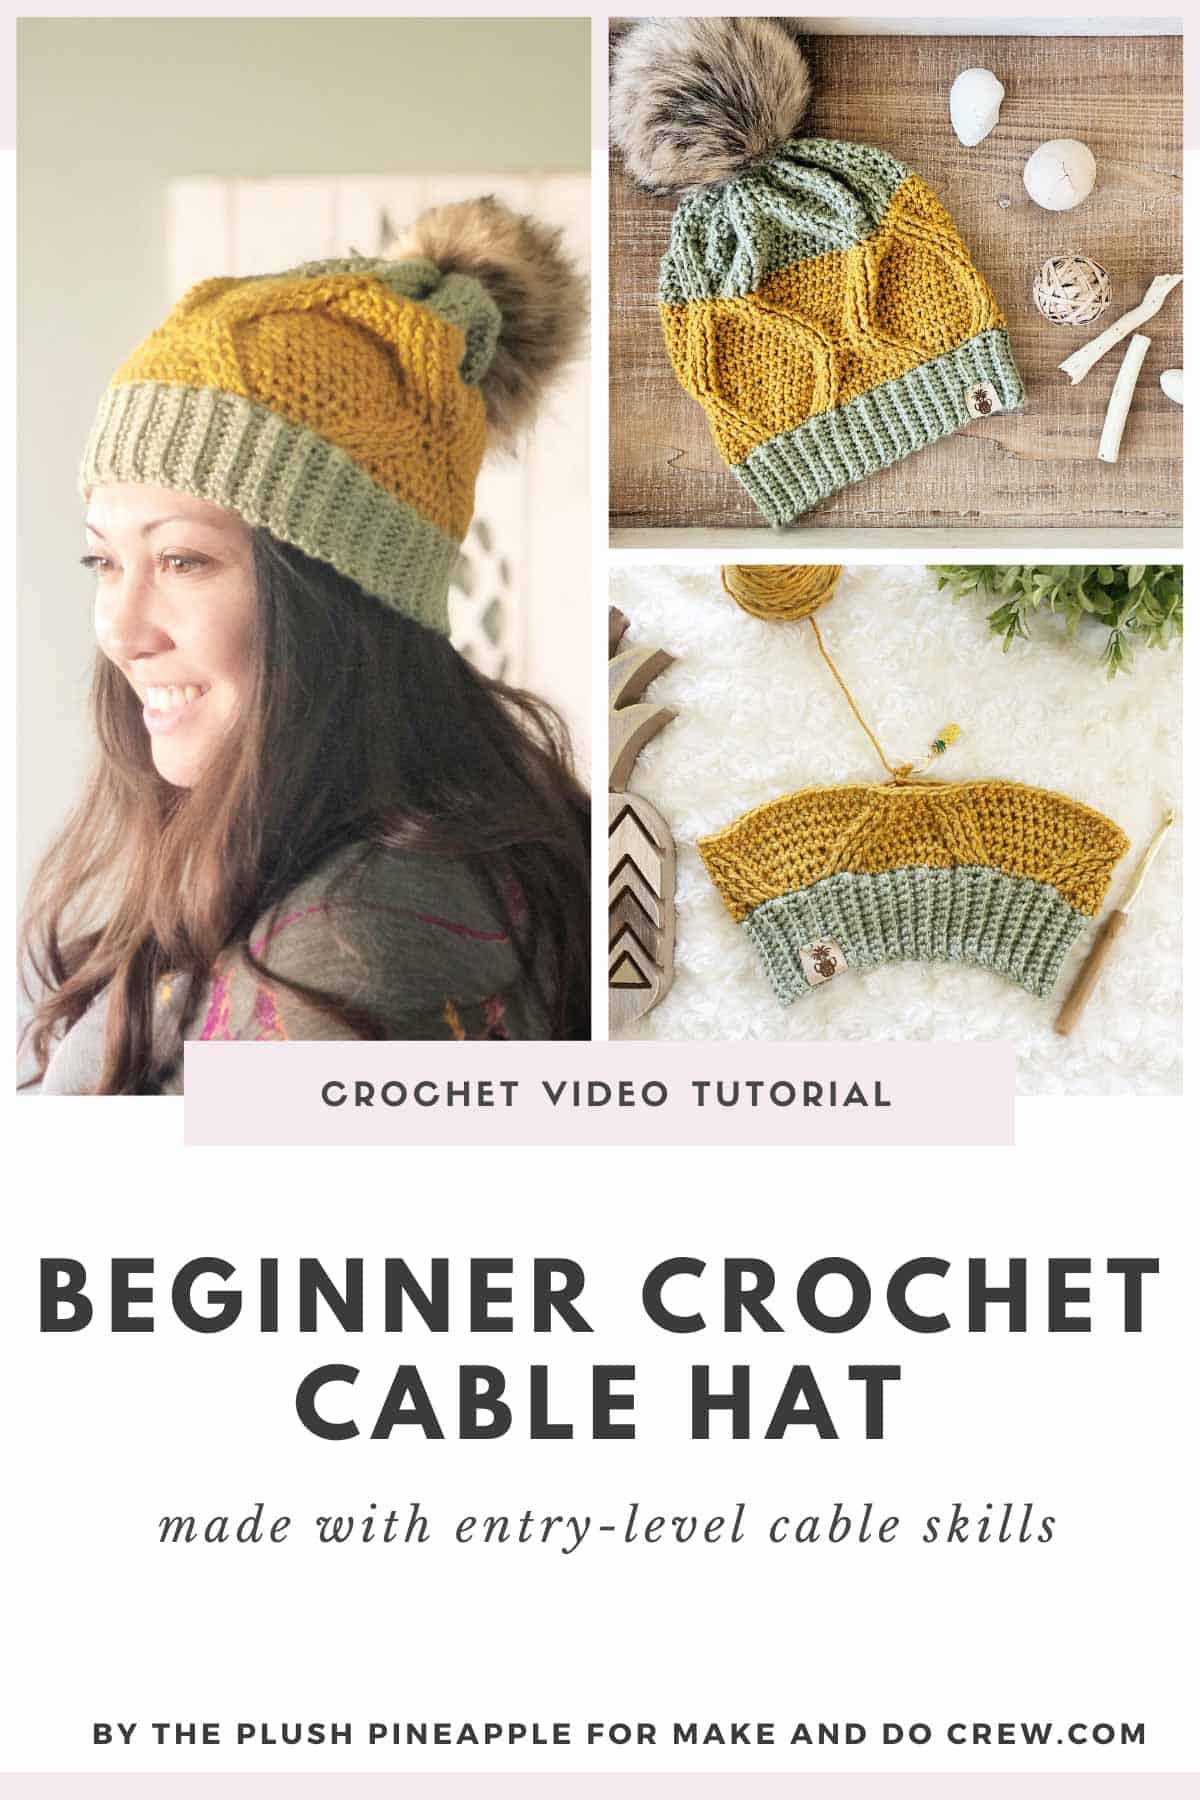 A grid of photos of a beginner crochet cable hat pattern being made and worn. Featuring Lion Brand Heartland yarn.